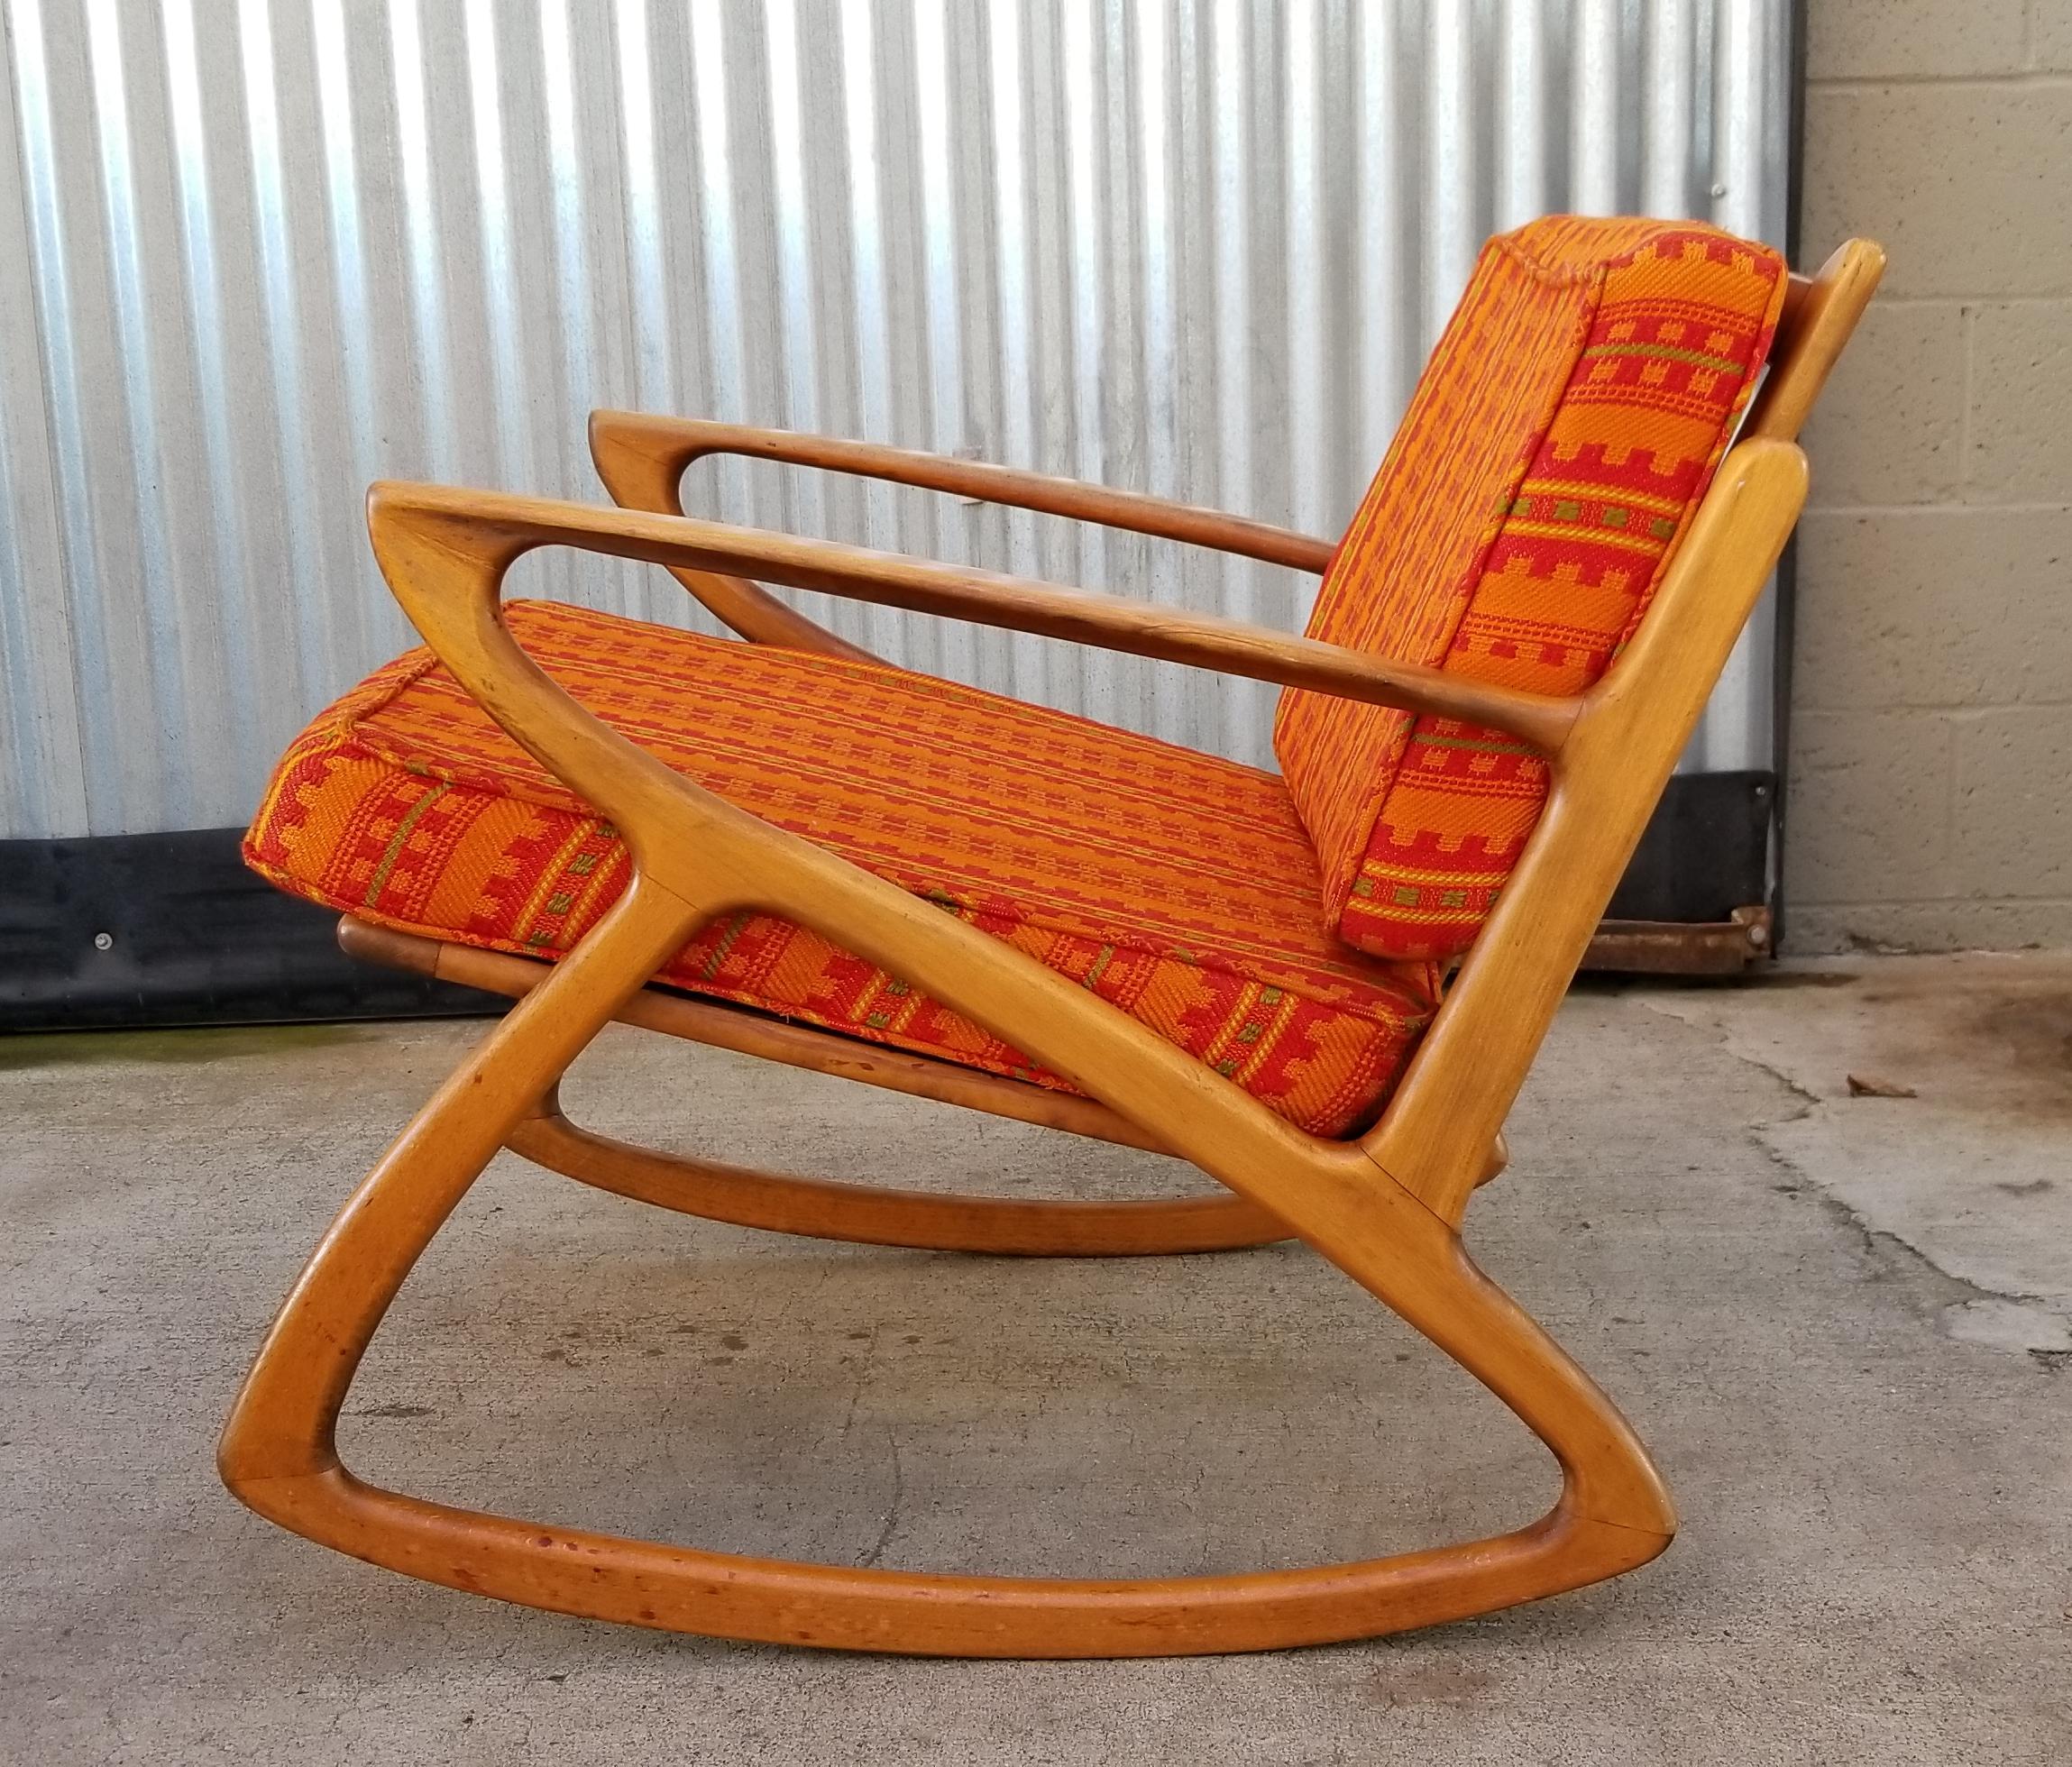 Exceptional architectural sculptured wood design to this Mid-Century Modern rocking chair. Danish modern style crafted in Italy, 1950s. Appears to be made of beechwood. Chair has design elements similar to that of Adrian Pearsall. Seat height